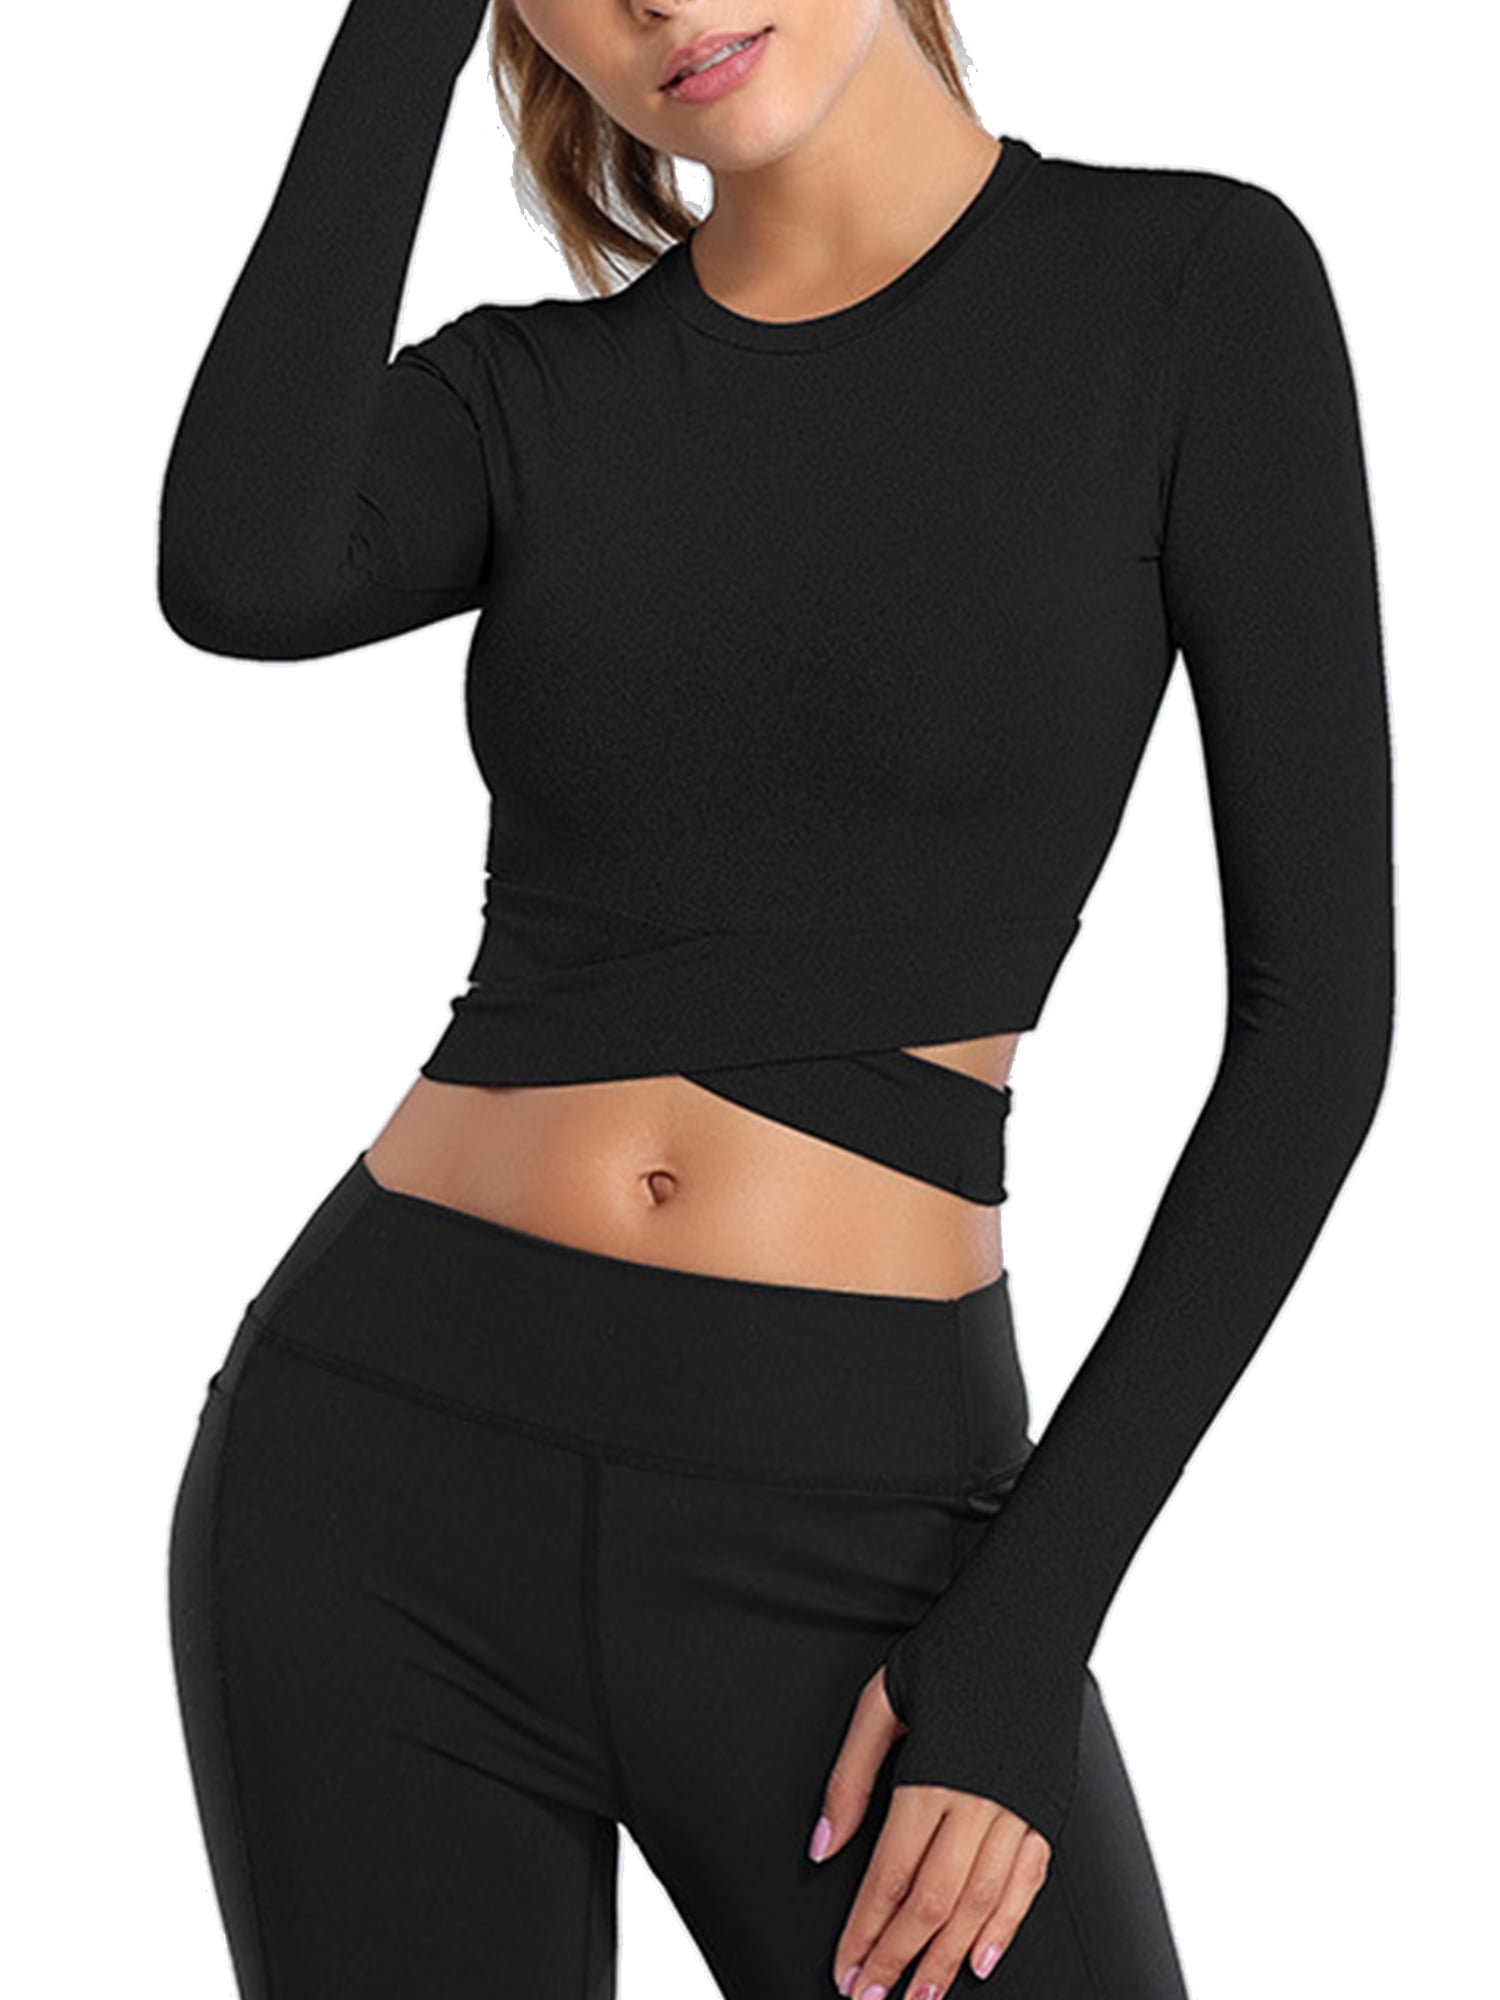 Uhndy Women's Workout Shirts Crop Top Workout Gym Exercise Clothes for  Girls Yoga Shirts with Thumb Holes Sexy Shirts Sportswear Athleticwear  Loungewear Long Sleeve Black,XL 